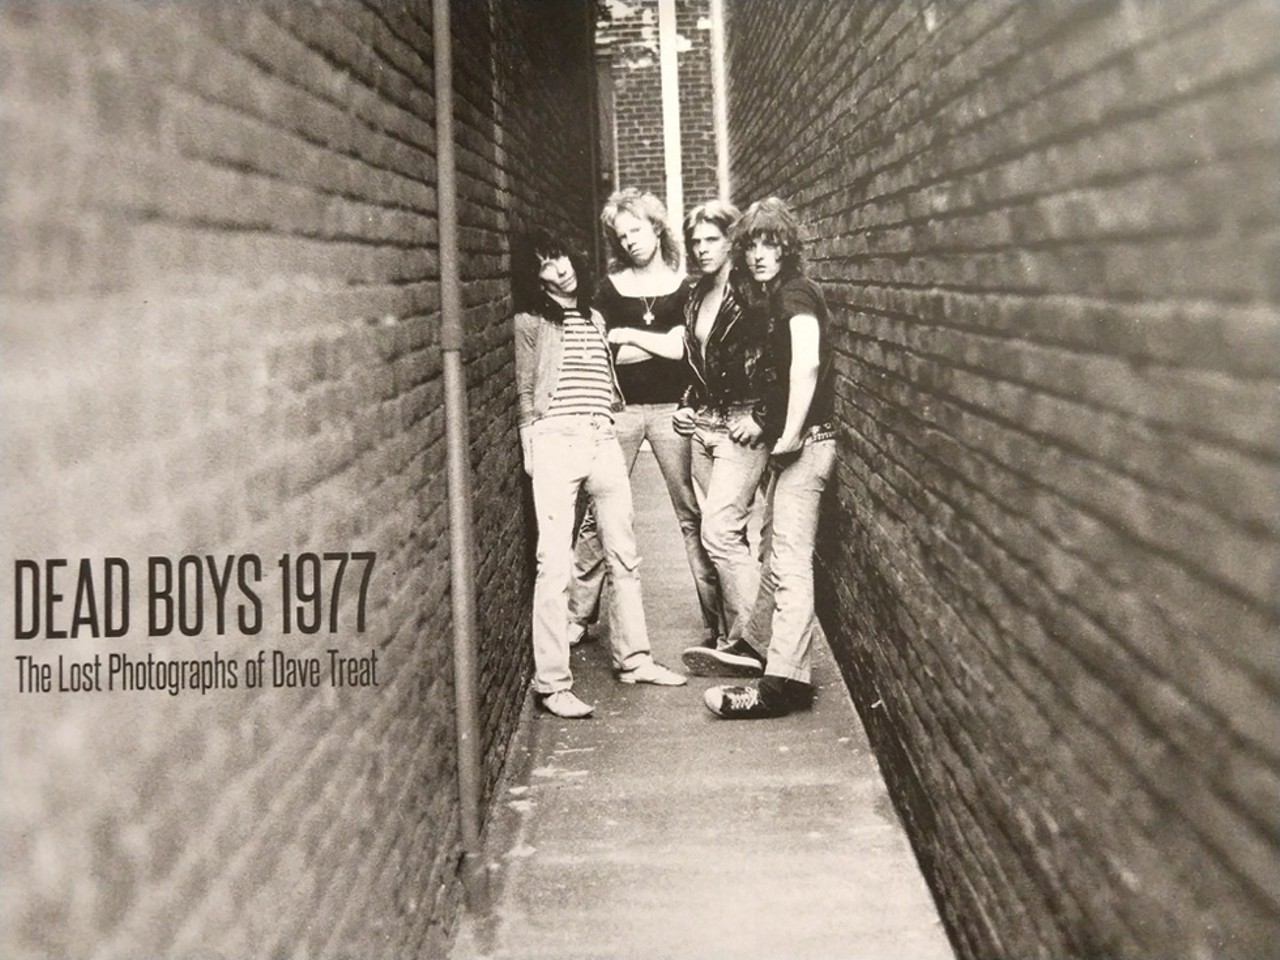 'Dead Boys 1977: The Lost Photographs of Dave Treat'
One of punk rock&#146;s most significant acts, the Dead Boys emerged from Cleveland in the late 1970s and would go on to achieve national (and even international) acclaim before quickly imploding.&nbsp;Photographer Dave Treat captured the band during that time period.&nbsp;Dead Boys 1977: The Lost Photographs of Dave Treat,&nbsp;edited and designed by locally based writer and graphic designer Ron Kretsch, chronicles the group&#146;s early days, which were documented but not widely enjoyed; many of the photos have never been seen by the public.&nbsp;The book is available locally at Visible Voice, Loop, Black Market, the Bookshop in Lakewood, My Mind&#146;s Eye, Weird Realms, Guide to Kulchur, Blue Arrow and Mac&#146;s Backs.